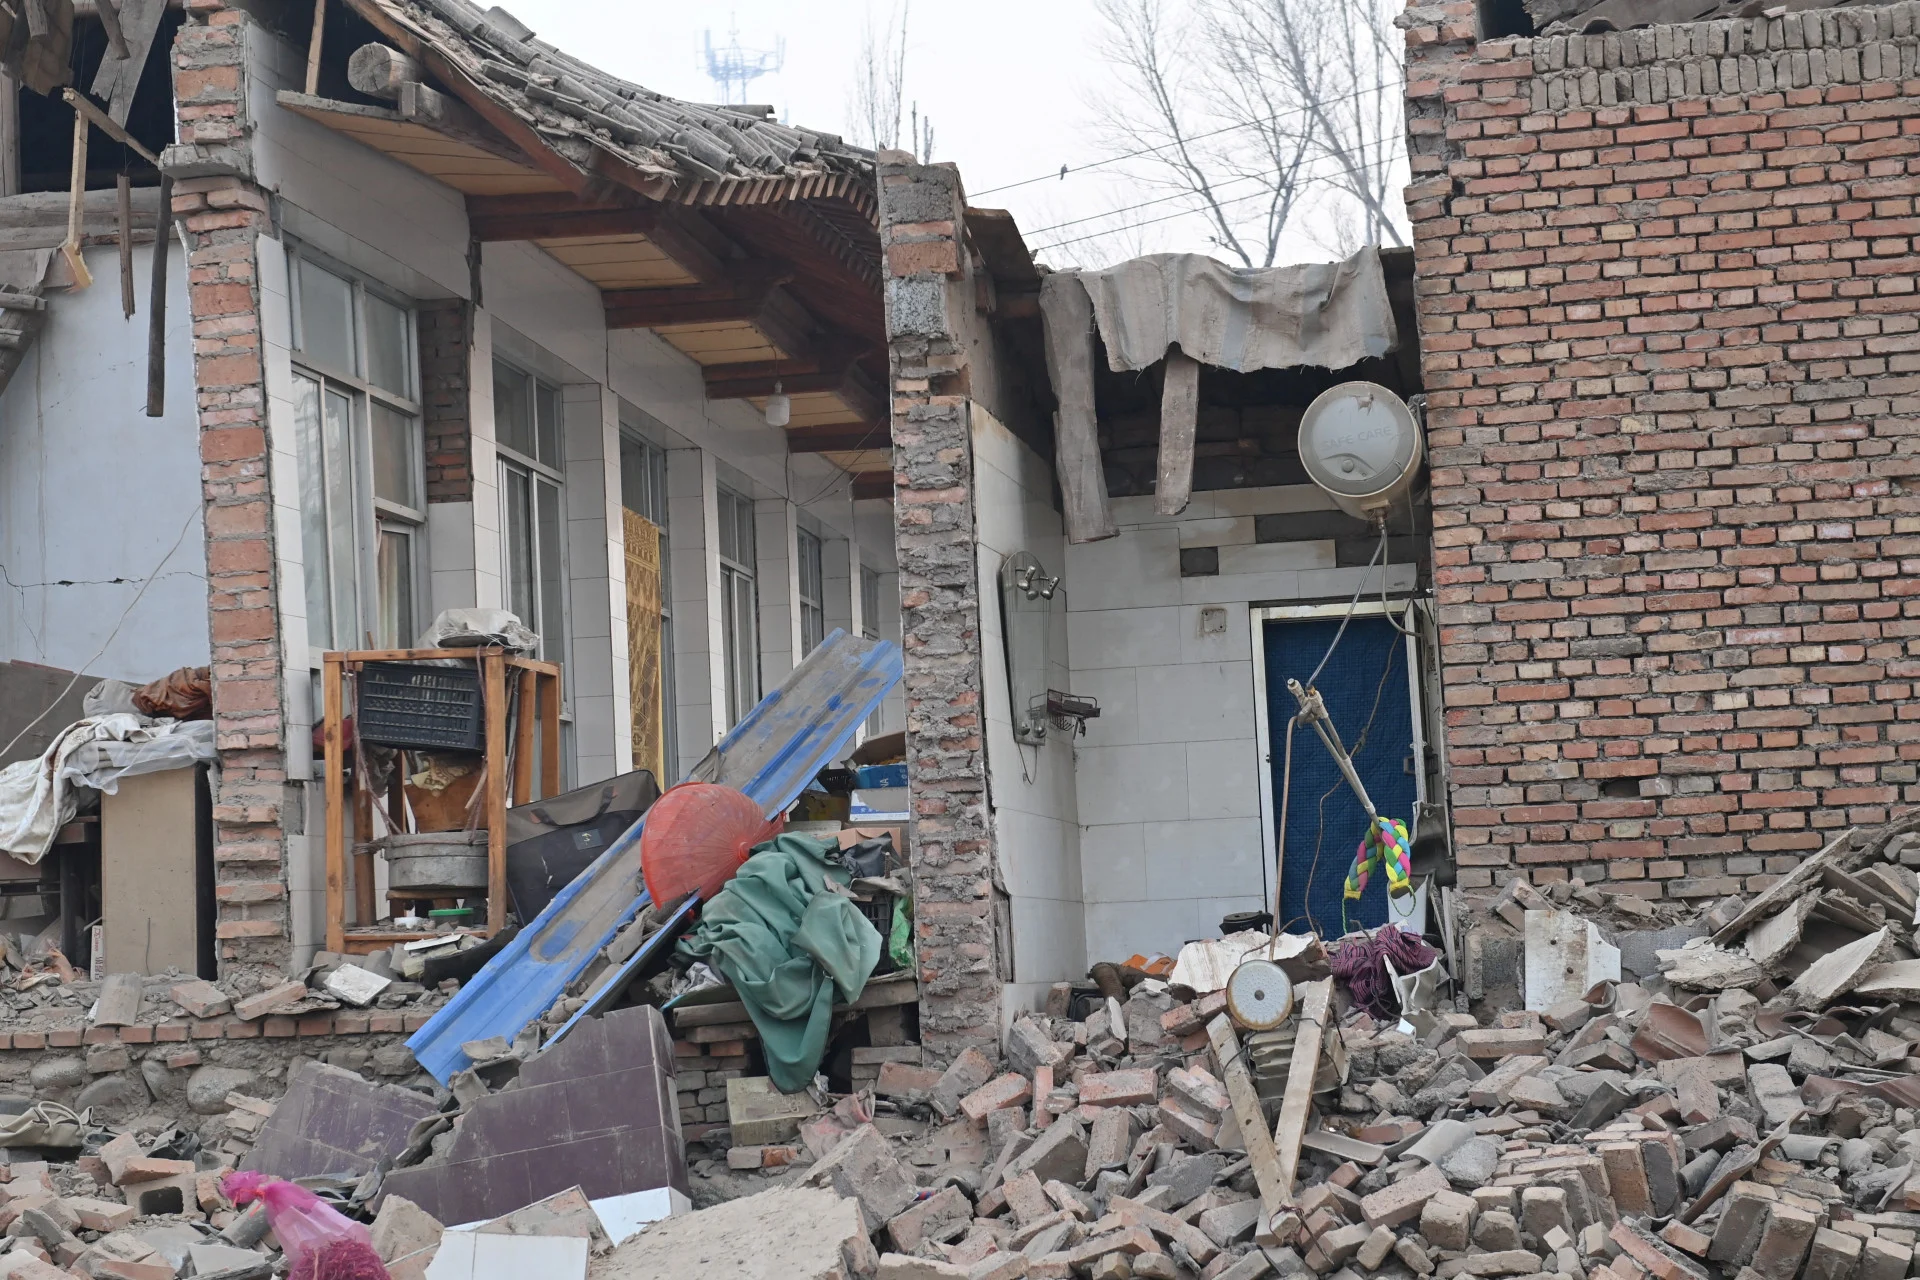 Reuters: A view of rubble and damaged buildings at Dahejia town following the earthquake in Jishishan county, Gansu province, China December 19, 2023. cnsphoto via REUTERS